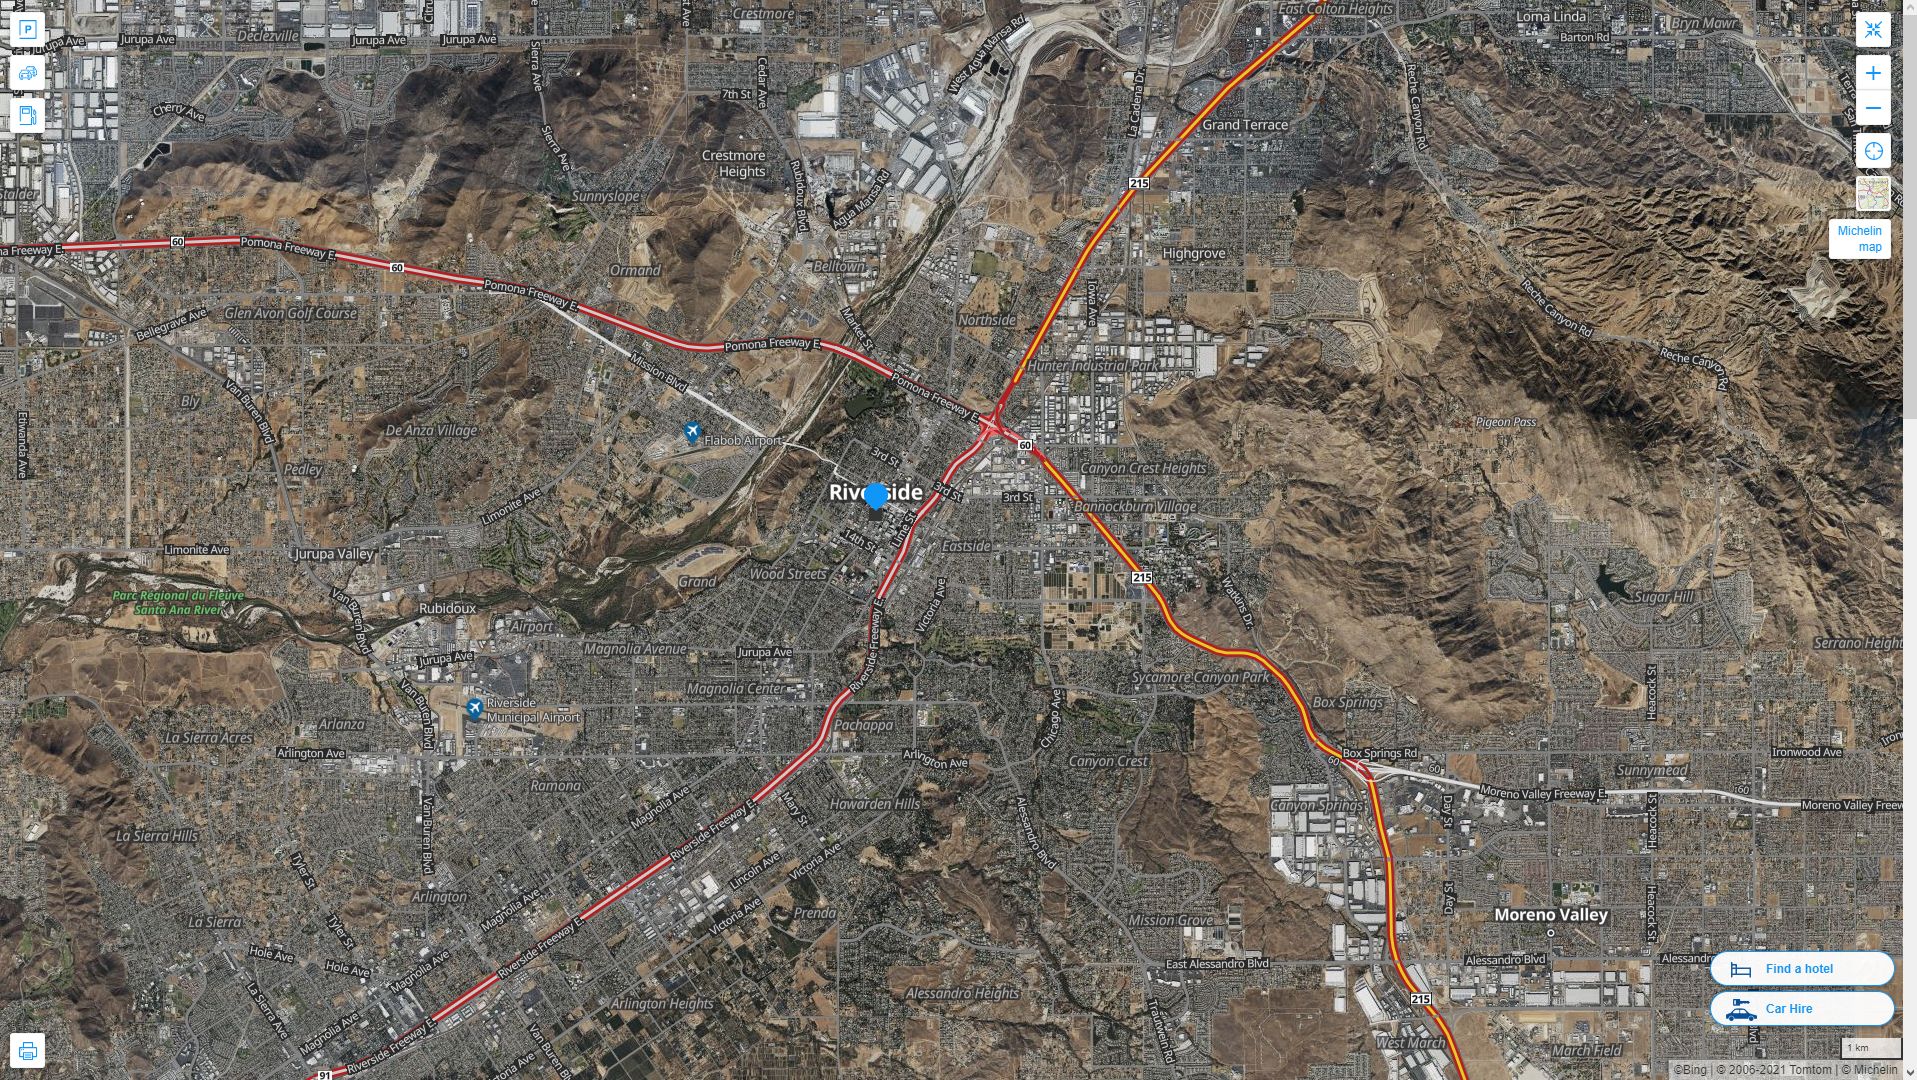 Riverside California Highway and Road Map with Satellite View